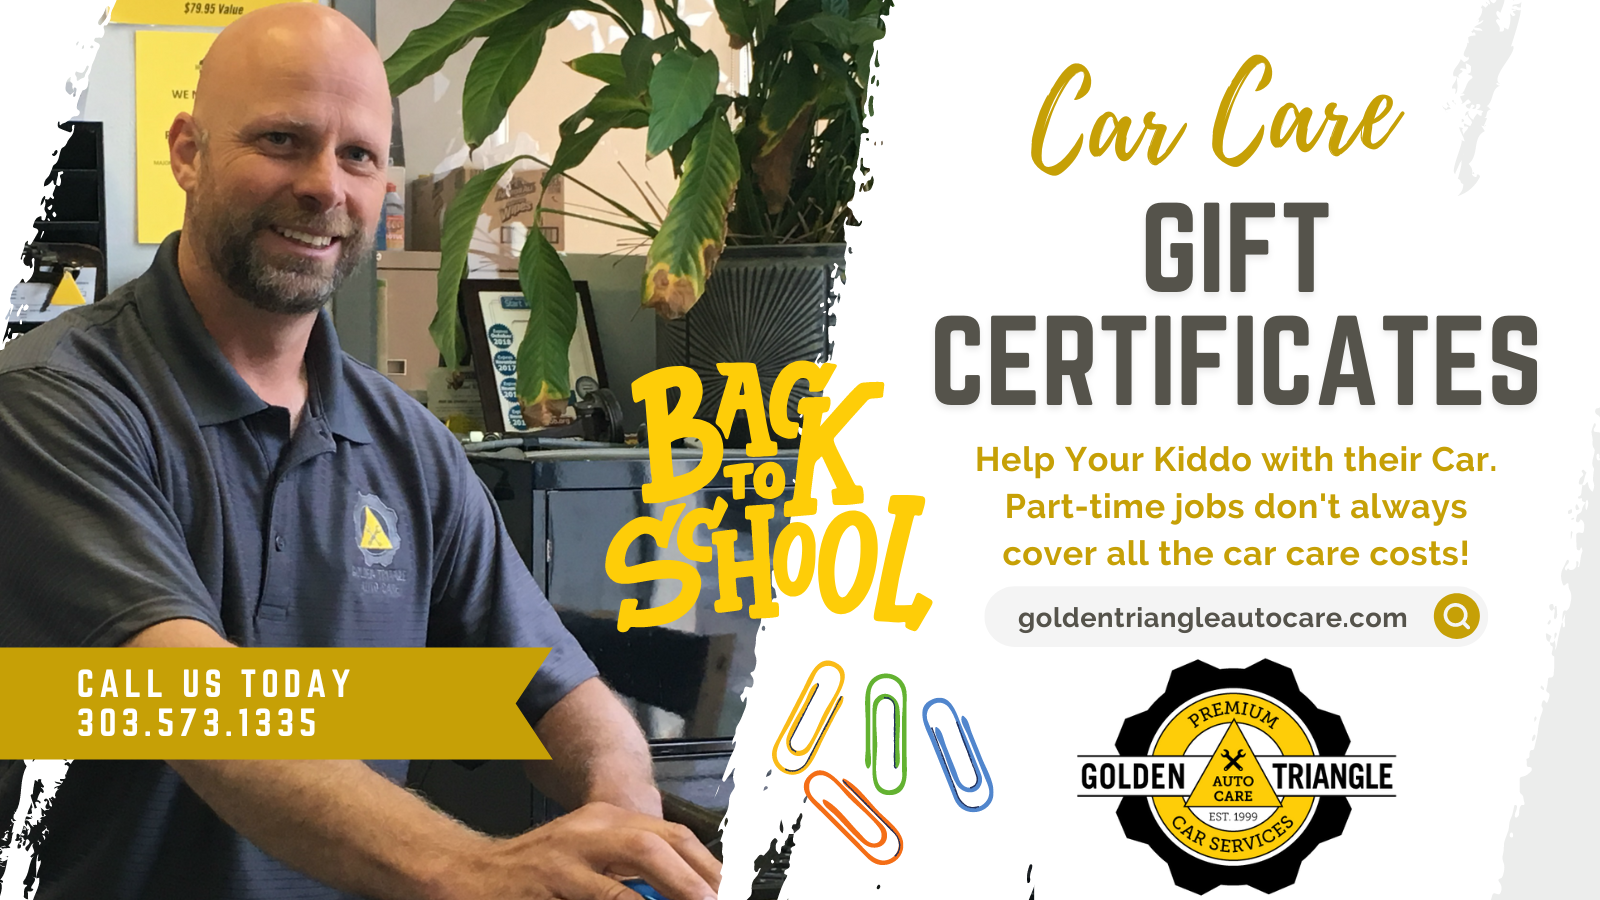 Back to School Car Care Gift Certificates